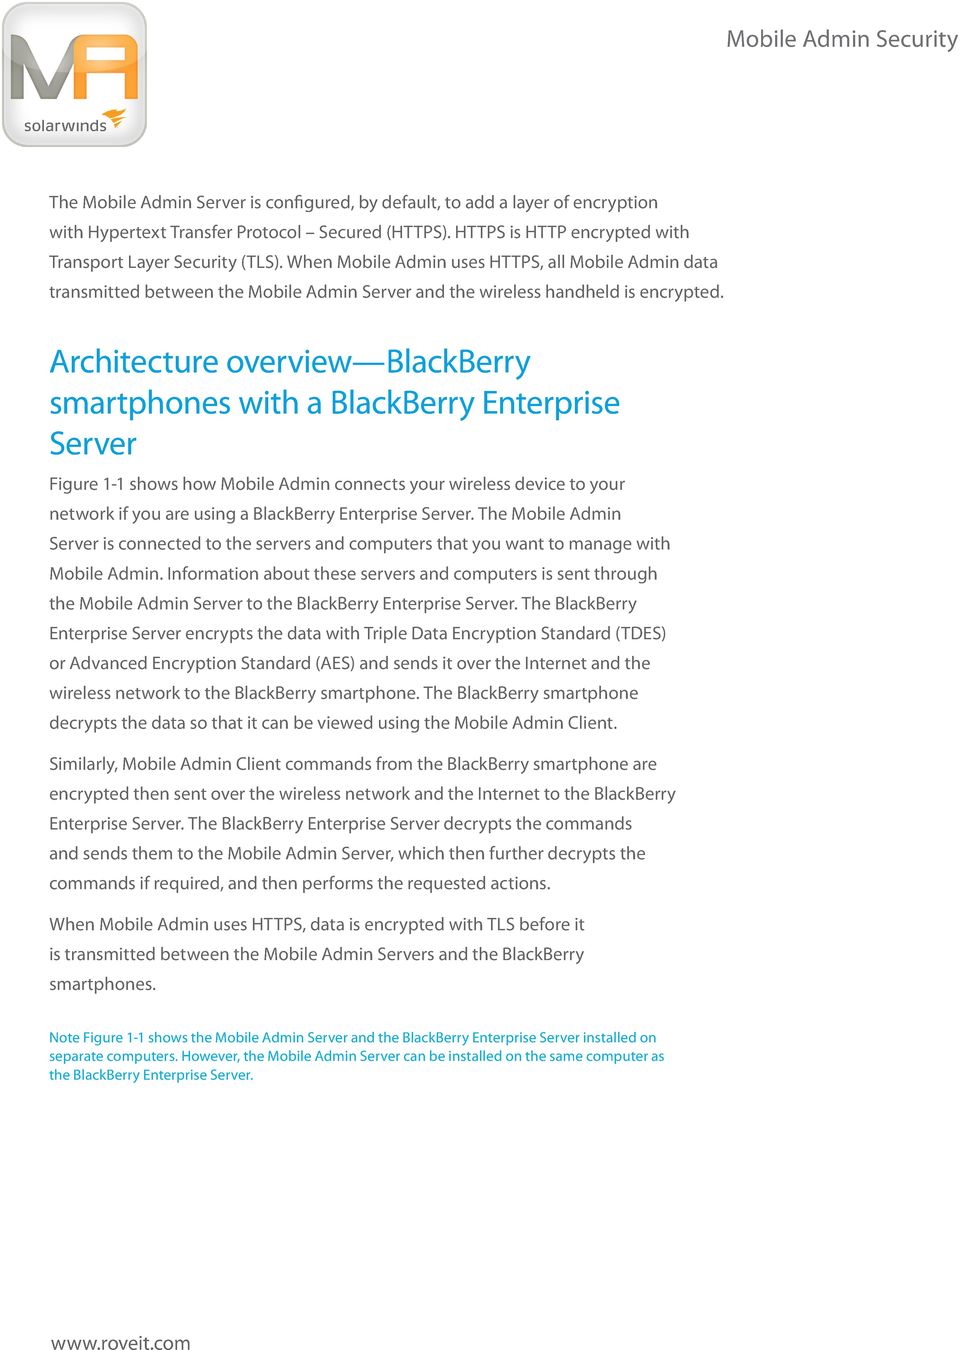 Architecture overview BlackBerry smartphones with a BlackBerry Enterprise Server Figure 1-1 shows how Mobile Admin connects your wireless device to your network if you are using a BlackBerry